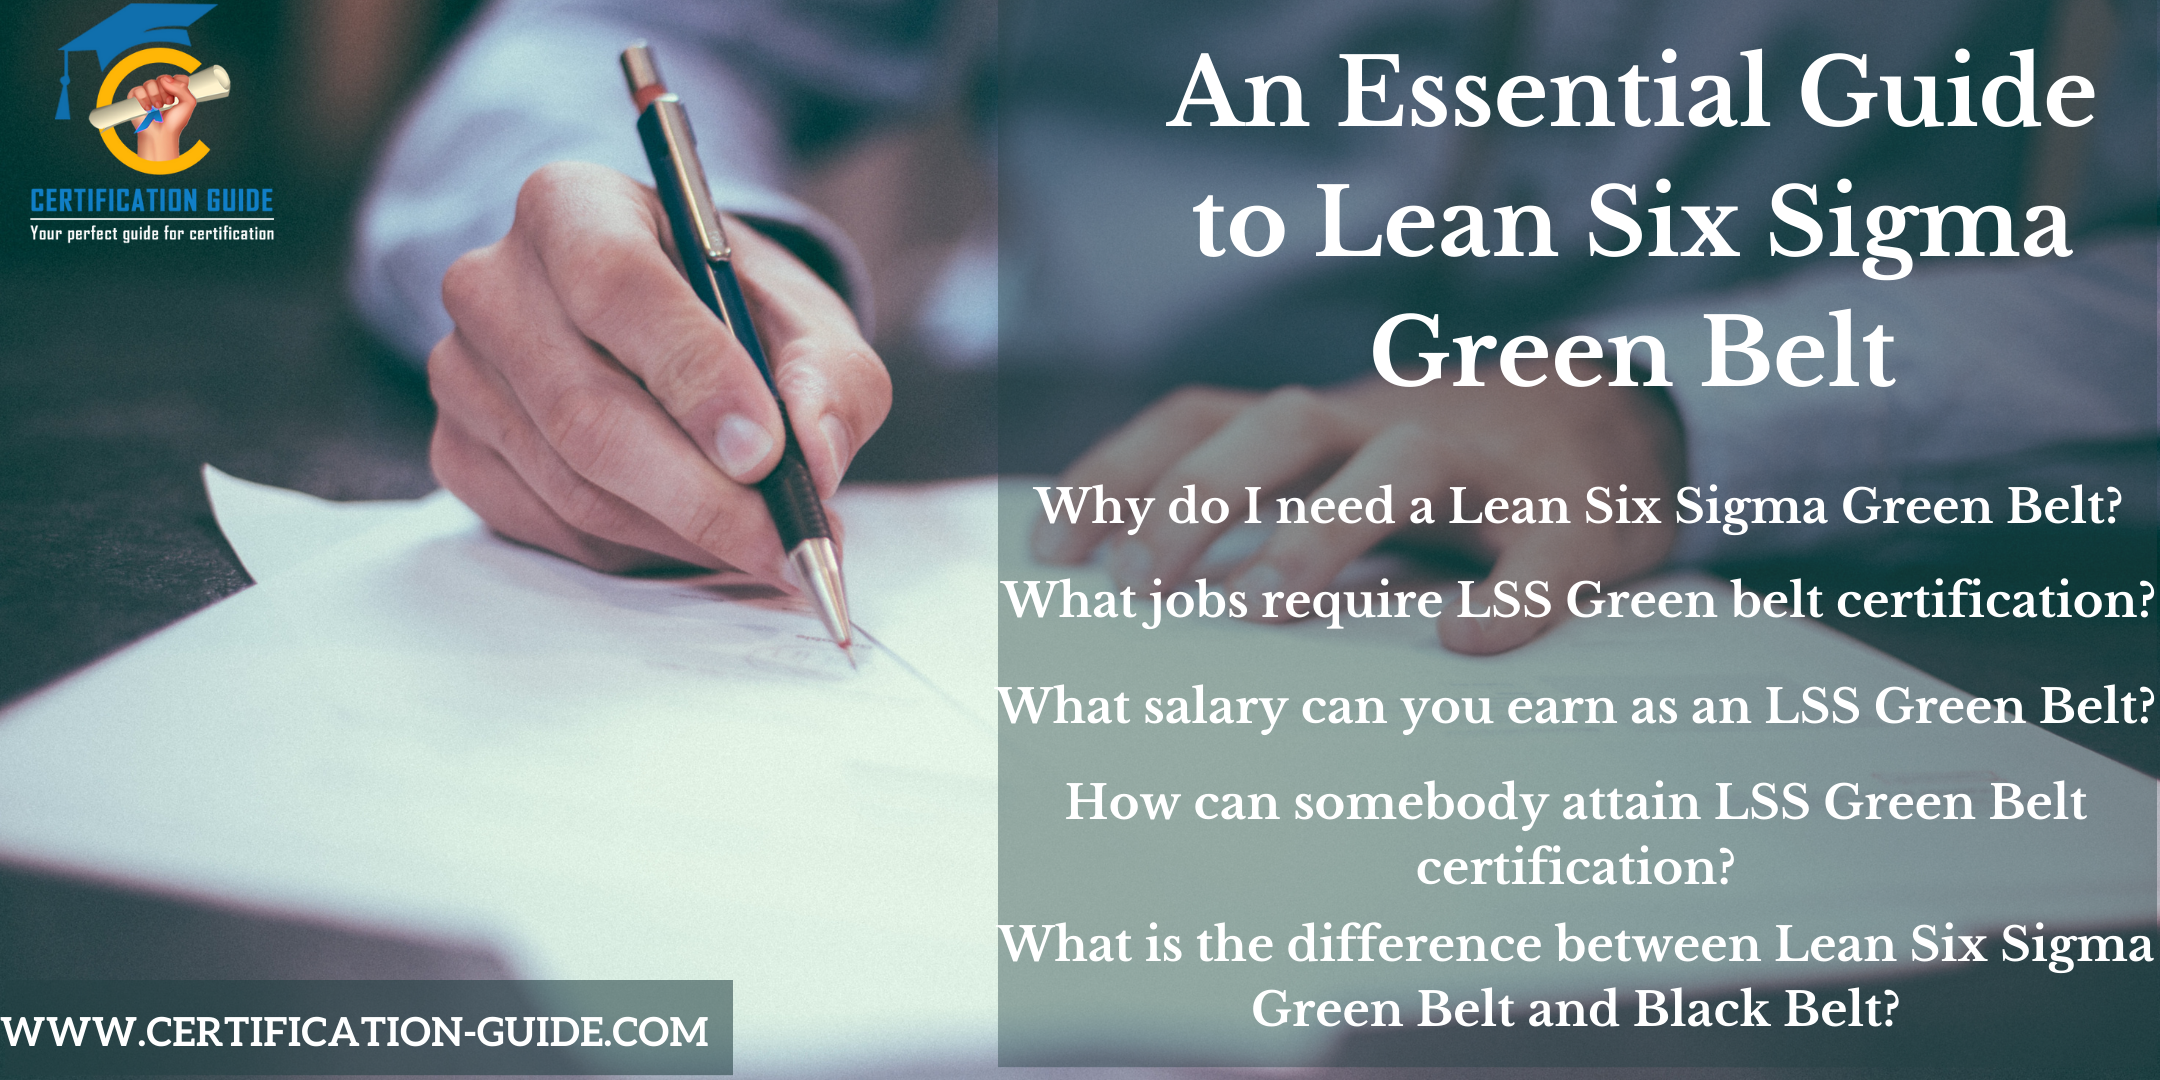 An Essential Guide to Lean Six Sigma Green Belt